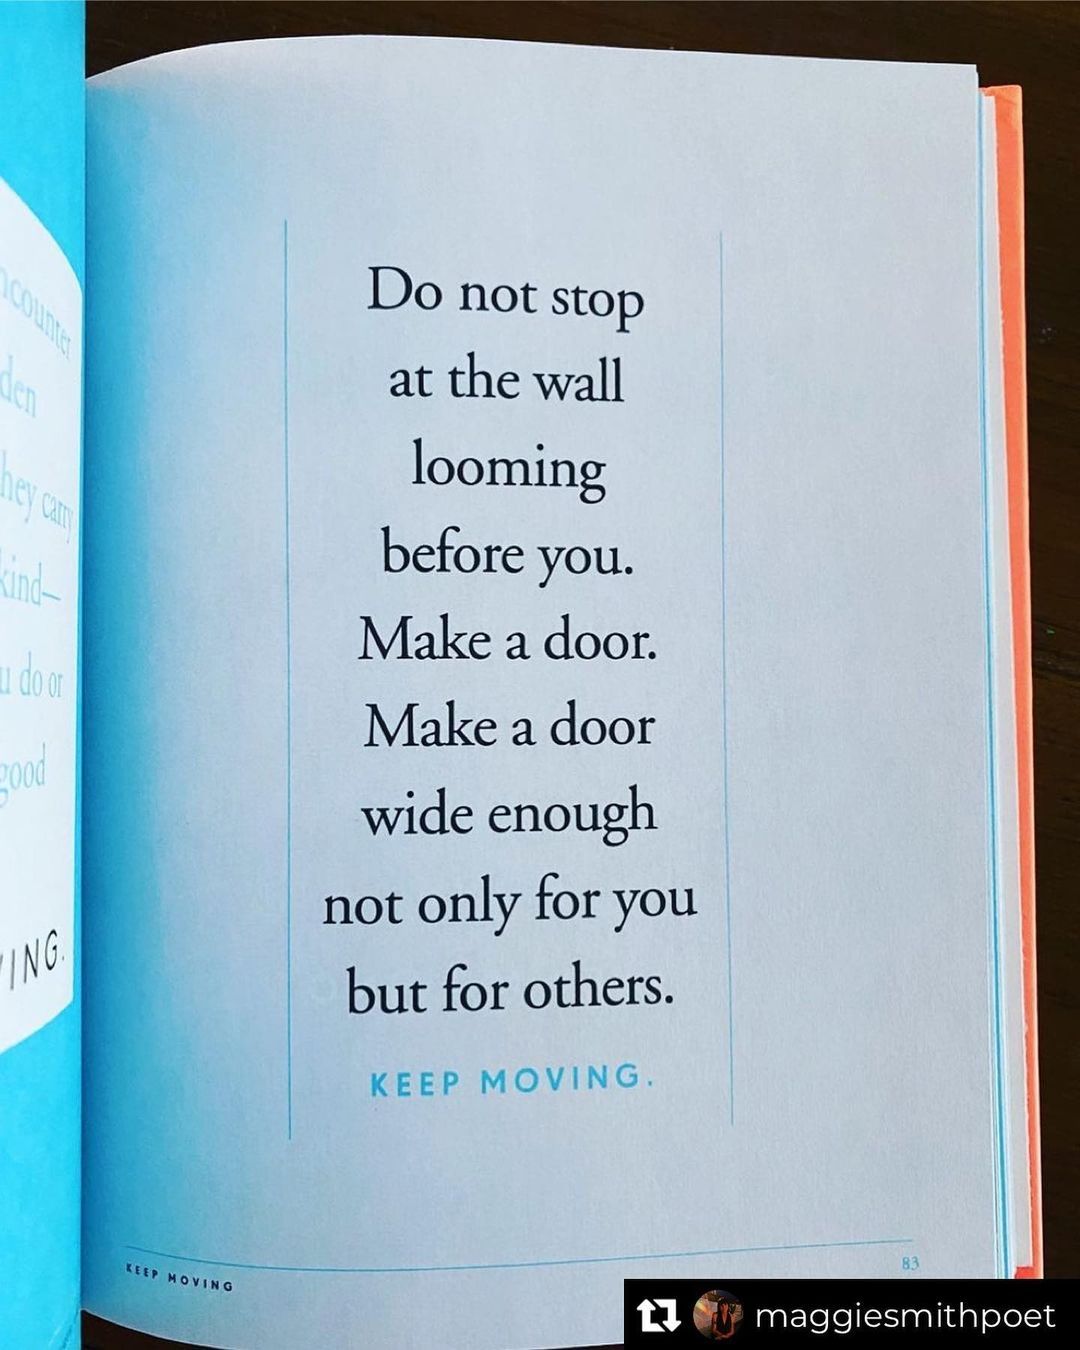 Through, around, over.
Repost from @maggiesmithpoet
•
Do not stop at the wall looming before you. Make a door. Make a door wide enough not only for you but for others. Keep moving.
A note-to-self from KEEP MOVING. Let’s...